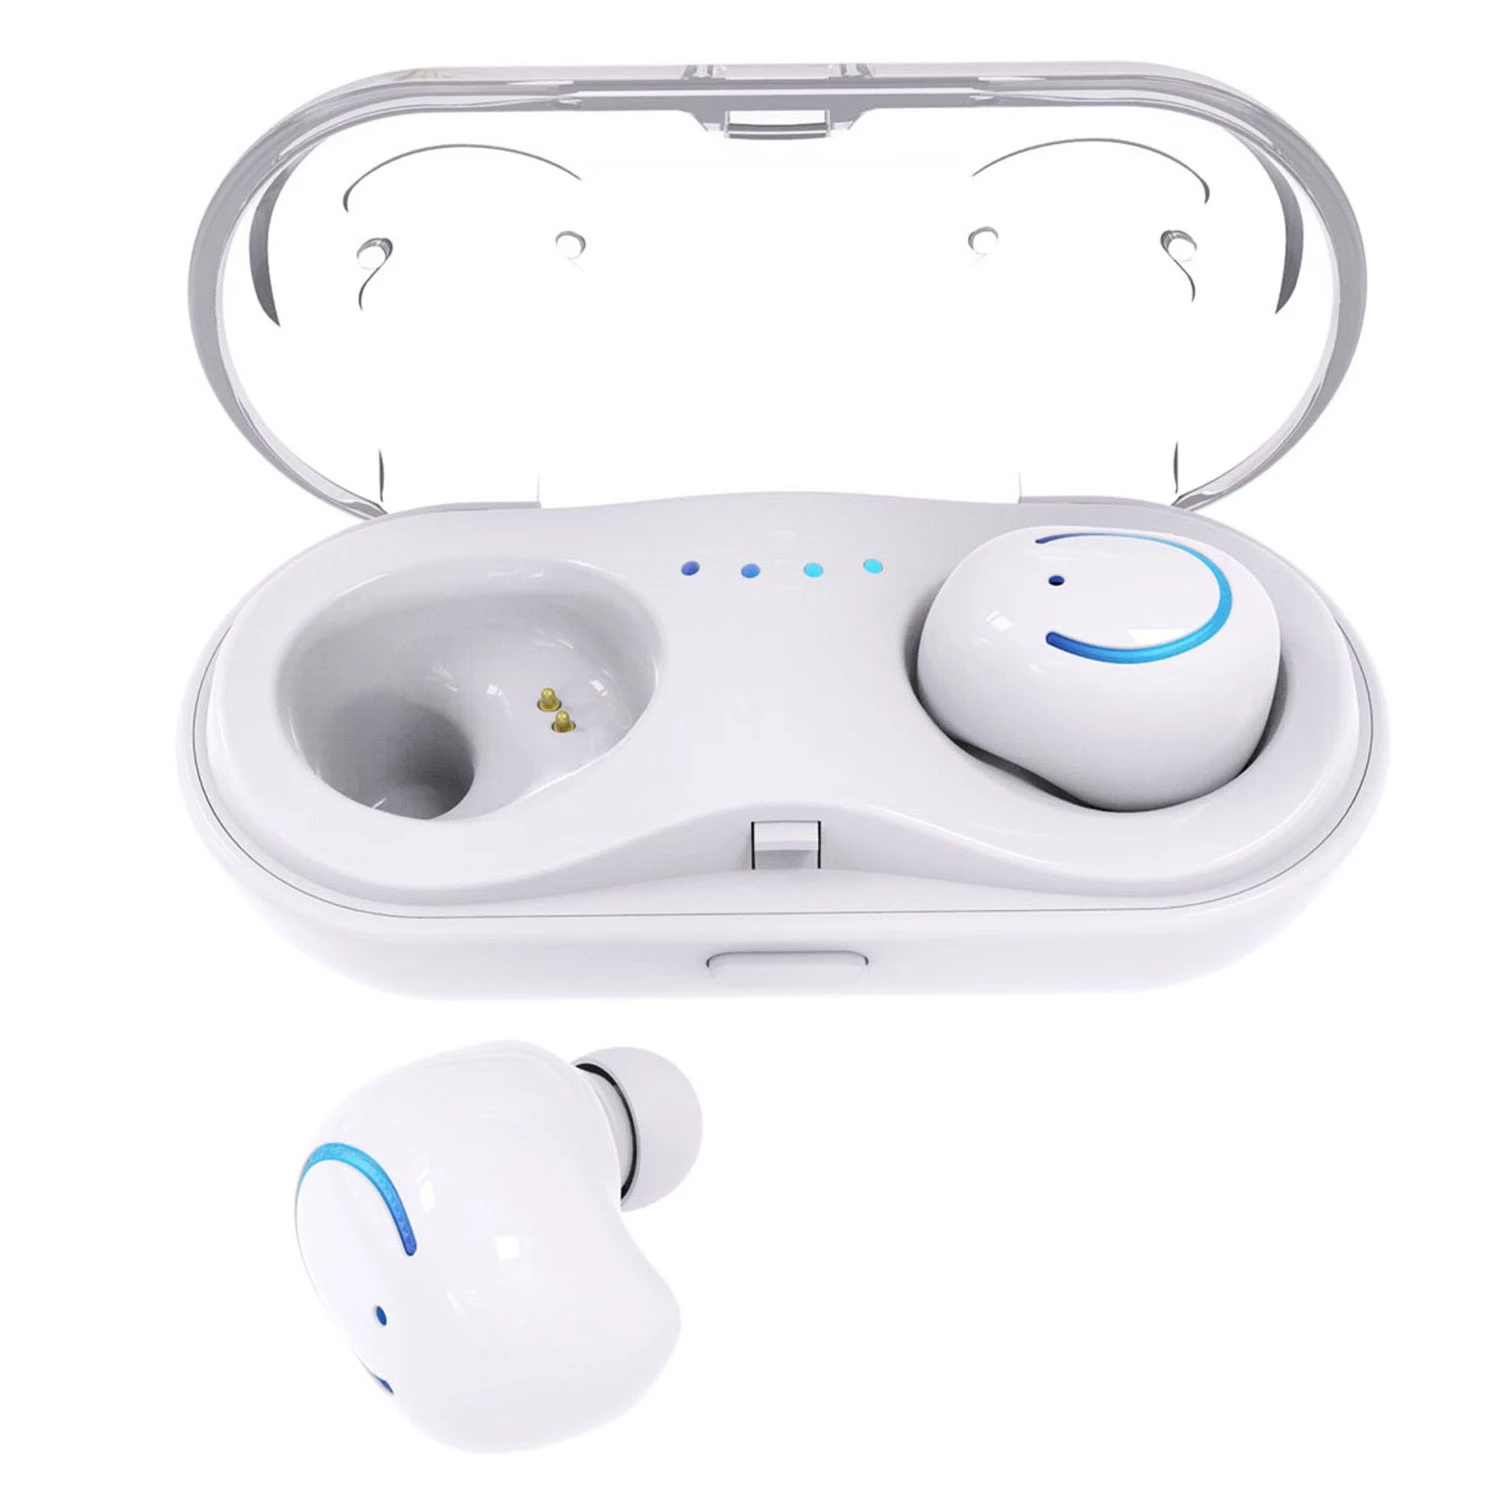 Wireless TWS Earbuds - Stereo Sound, Multiple Packs and Pieces